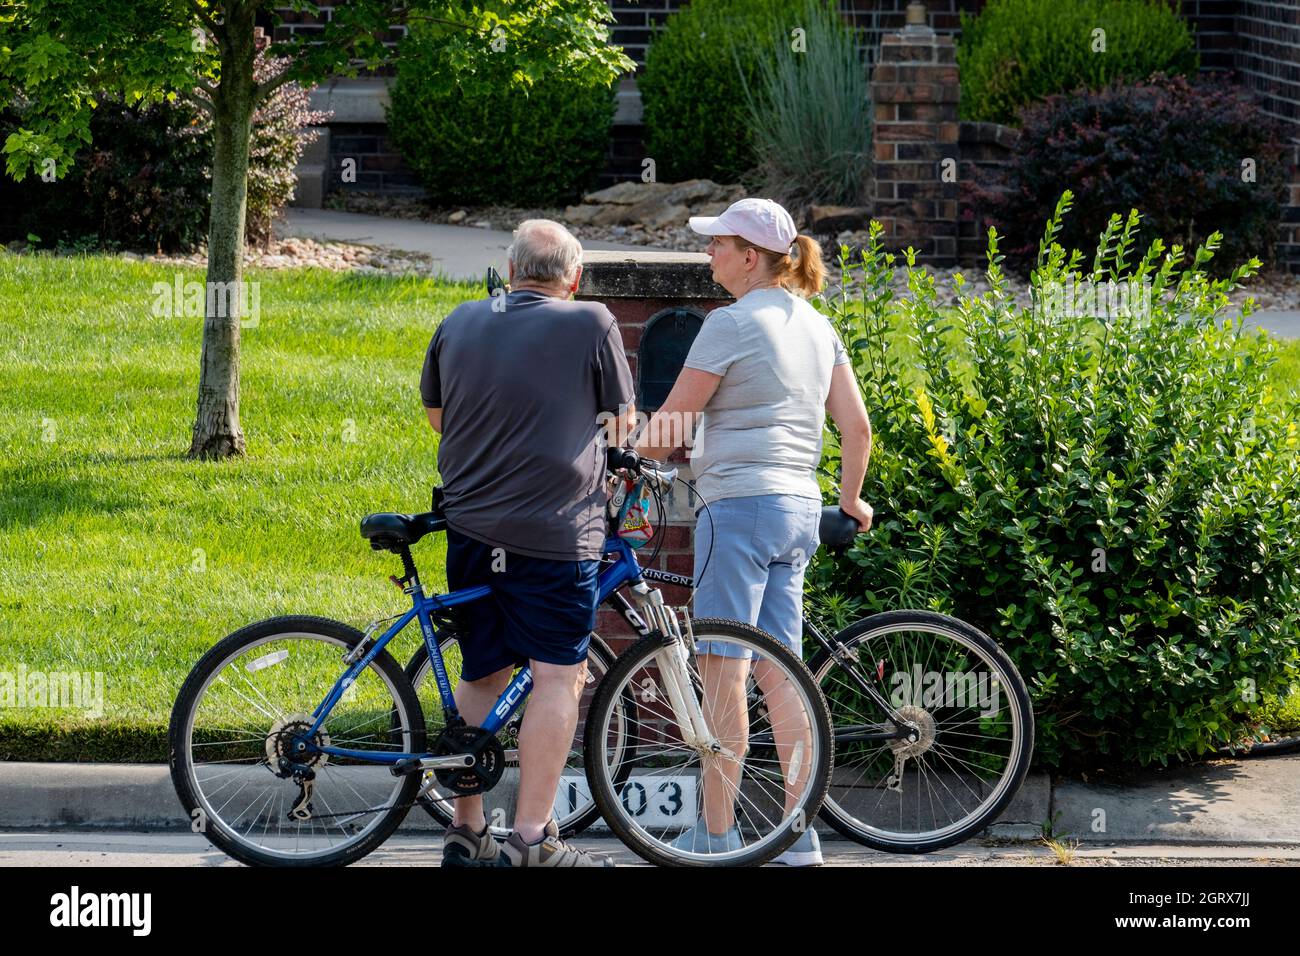 A senior Caucasian man stops his bicycle in the street of a residential neighborhood to answer his mobile phone while a woman companion waits. USA. Stock Photo